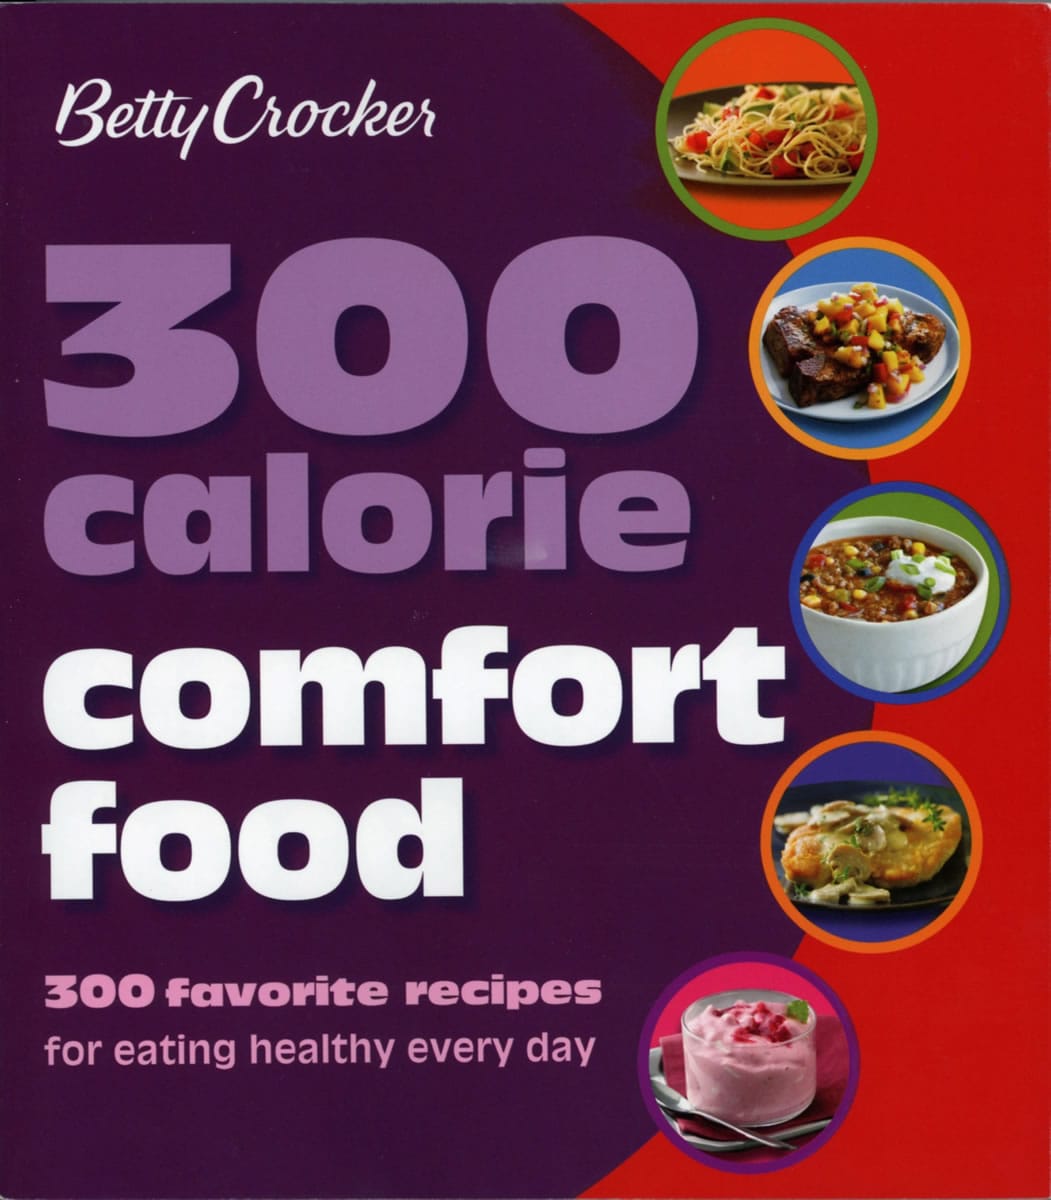 Betty Crocker 300 calorie comfort food 300 favorite recipes for eating healthy every day, including a healthier Italian Sausage Egg Bake.